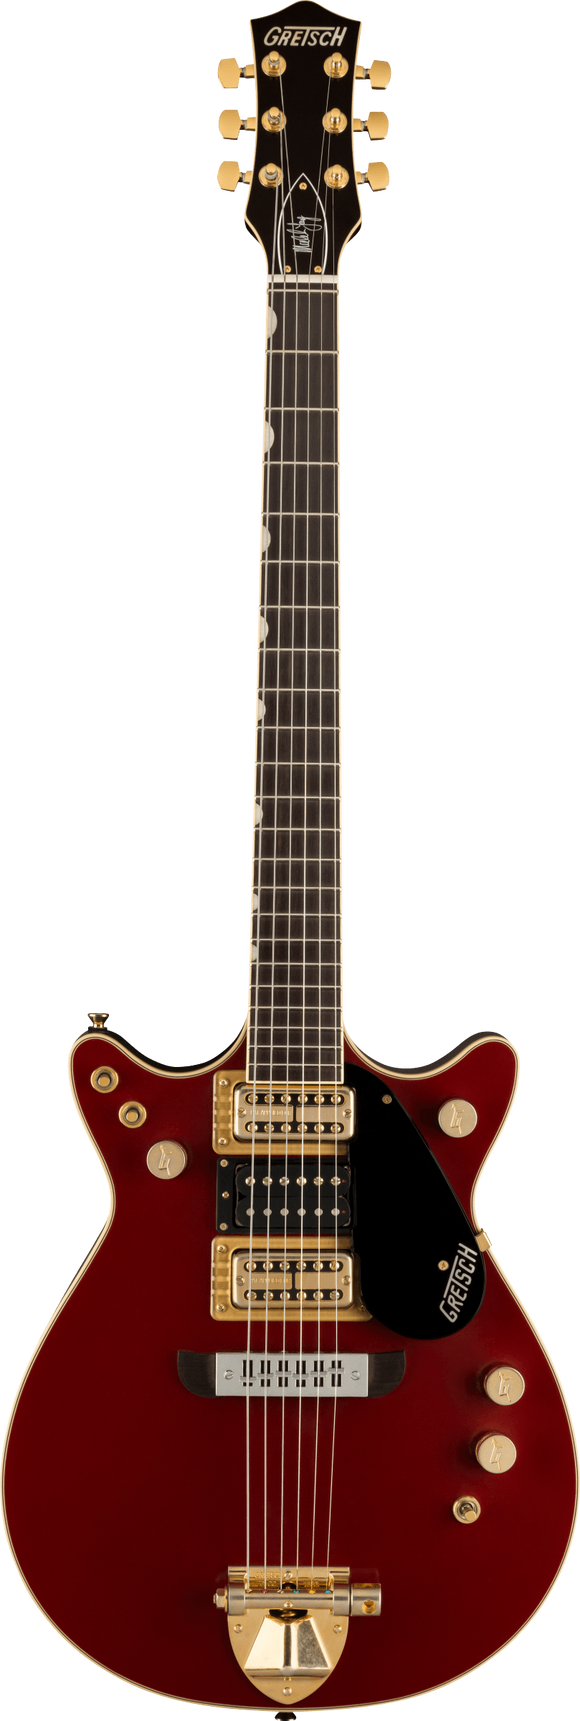 Gretsch G6131-MY-RB Limited Edition Malcolm Young Signature Jet, Vintage Firebird Red